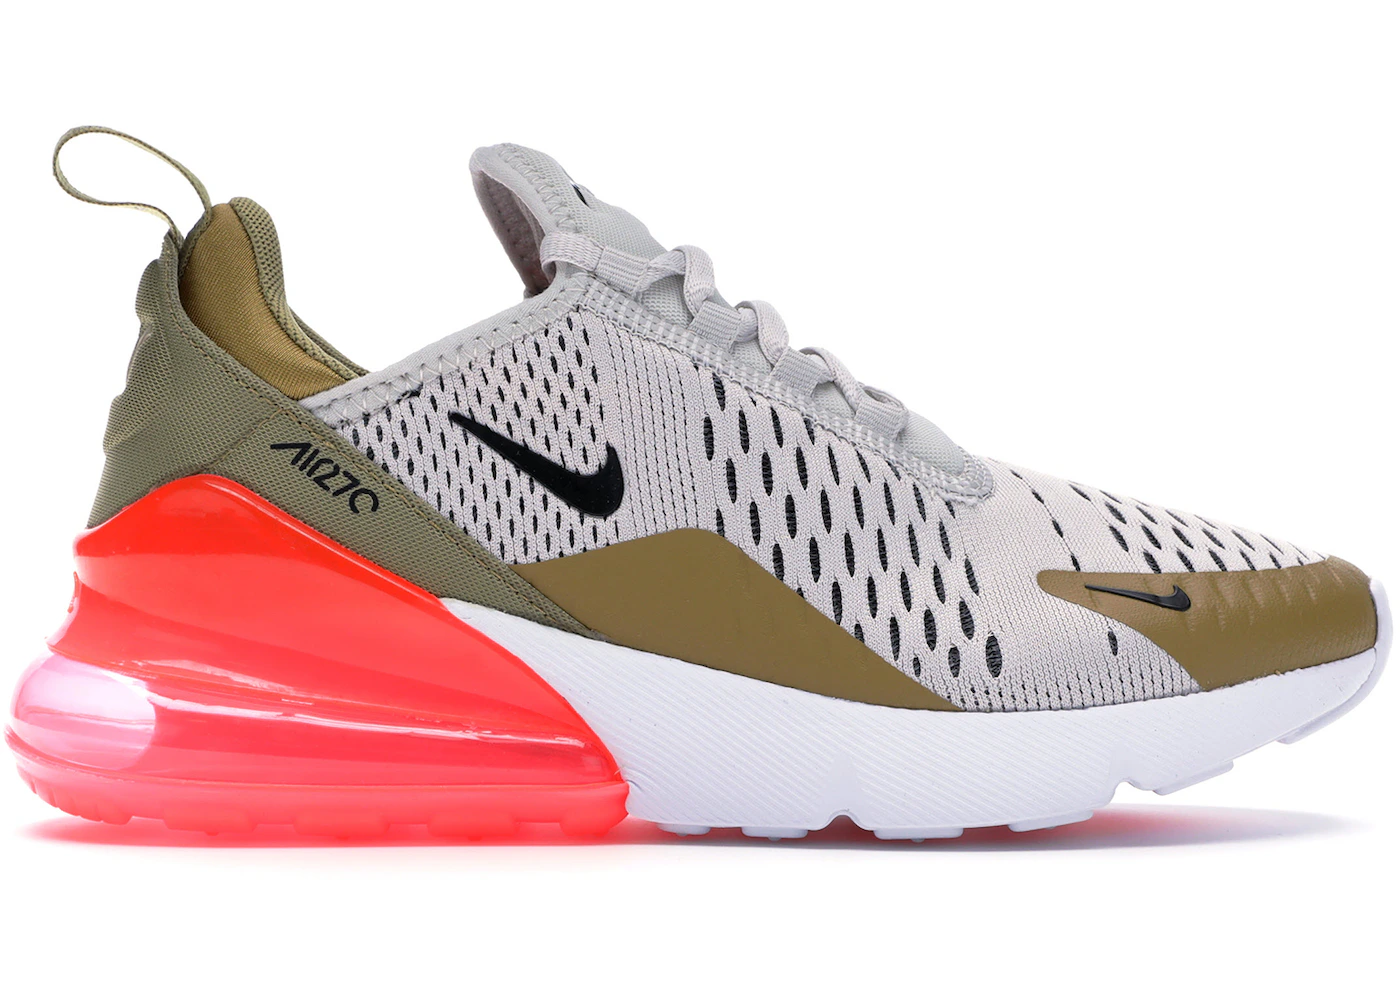 Driving force Confine responsibility Nike Air Max 270 Flat Gold (W) - AH6789-700